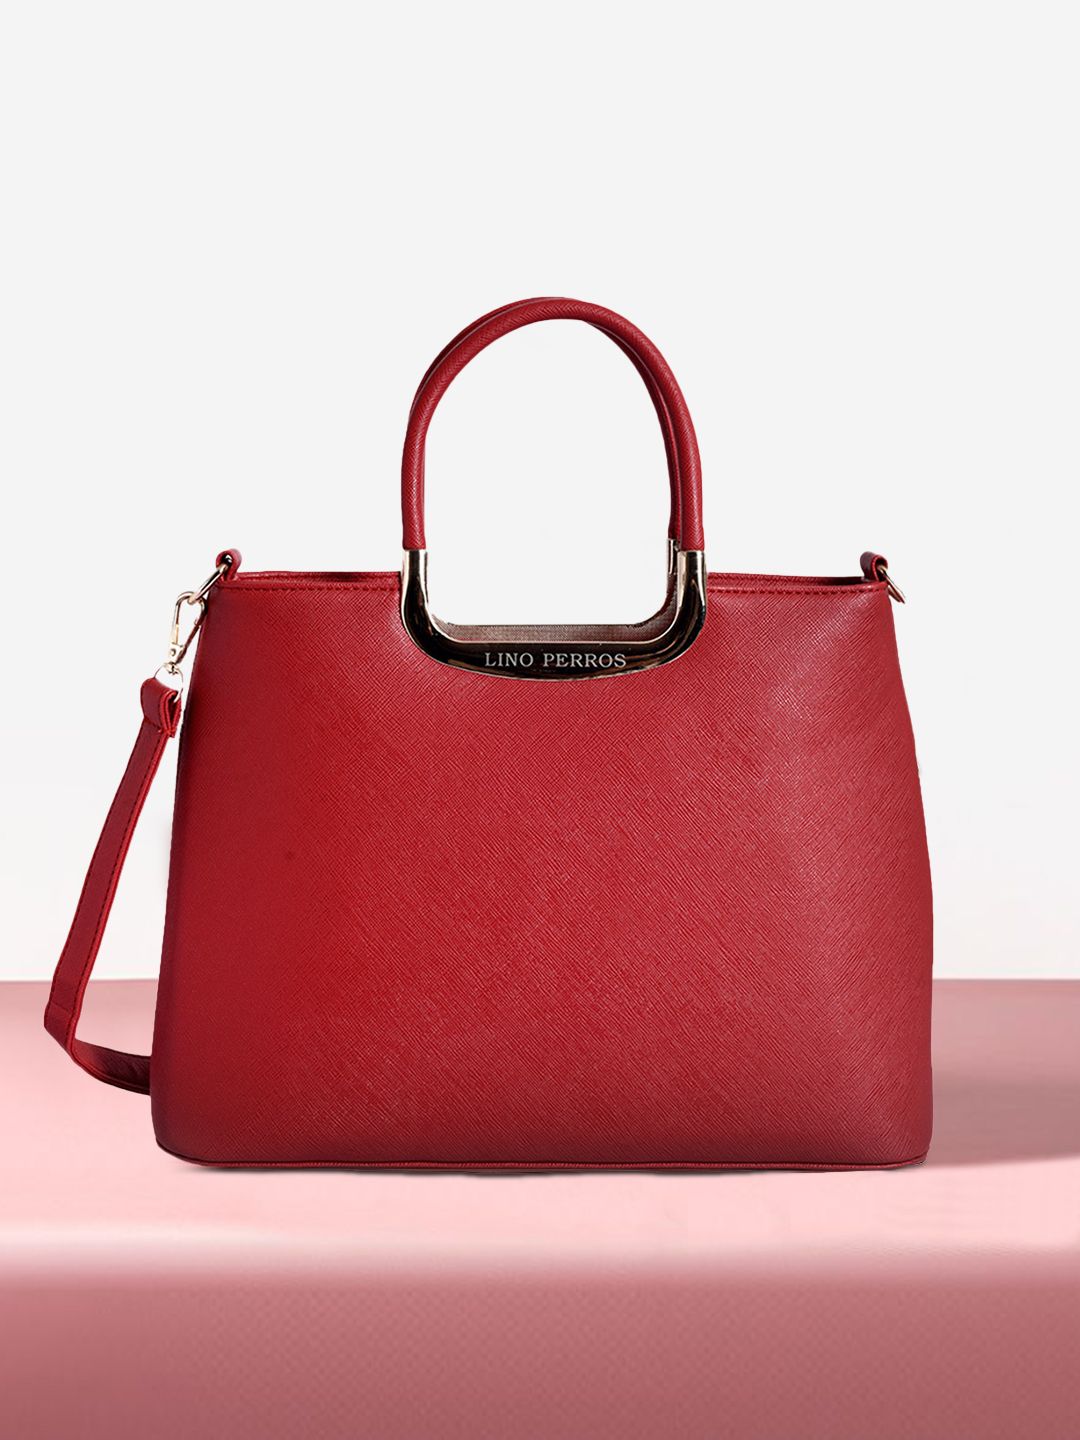 Lino Perros Red Textured Handbag with Sling Strap Price in India